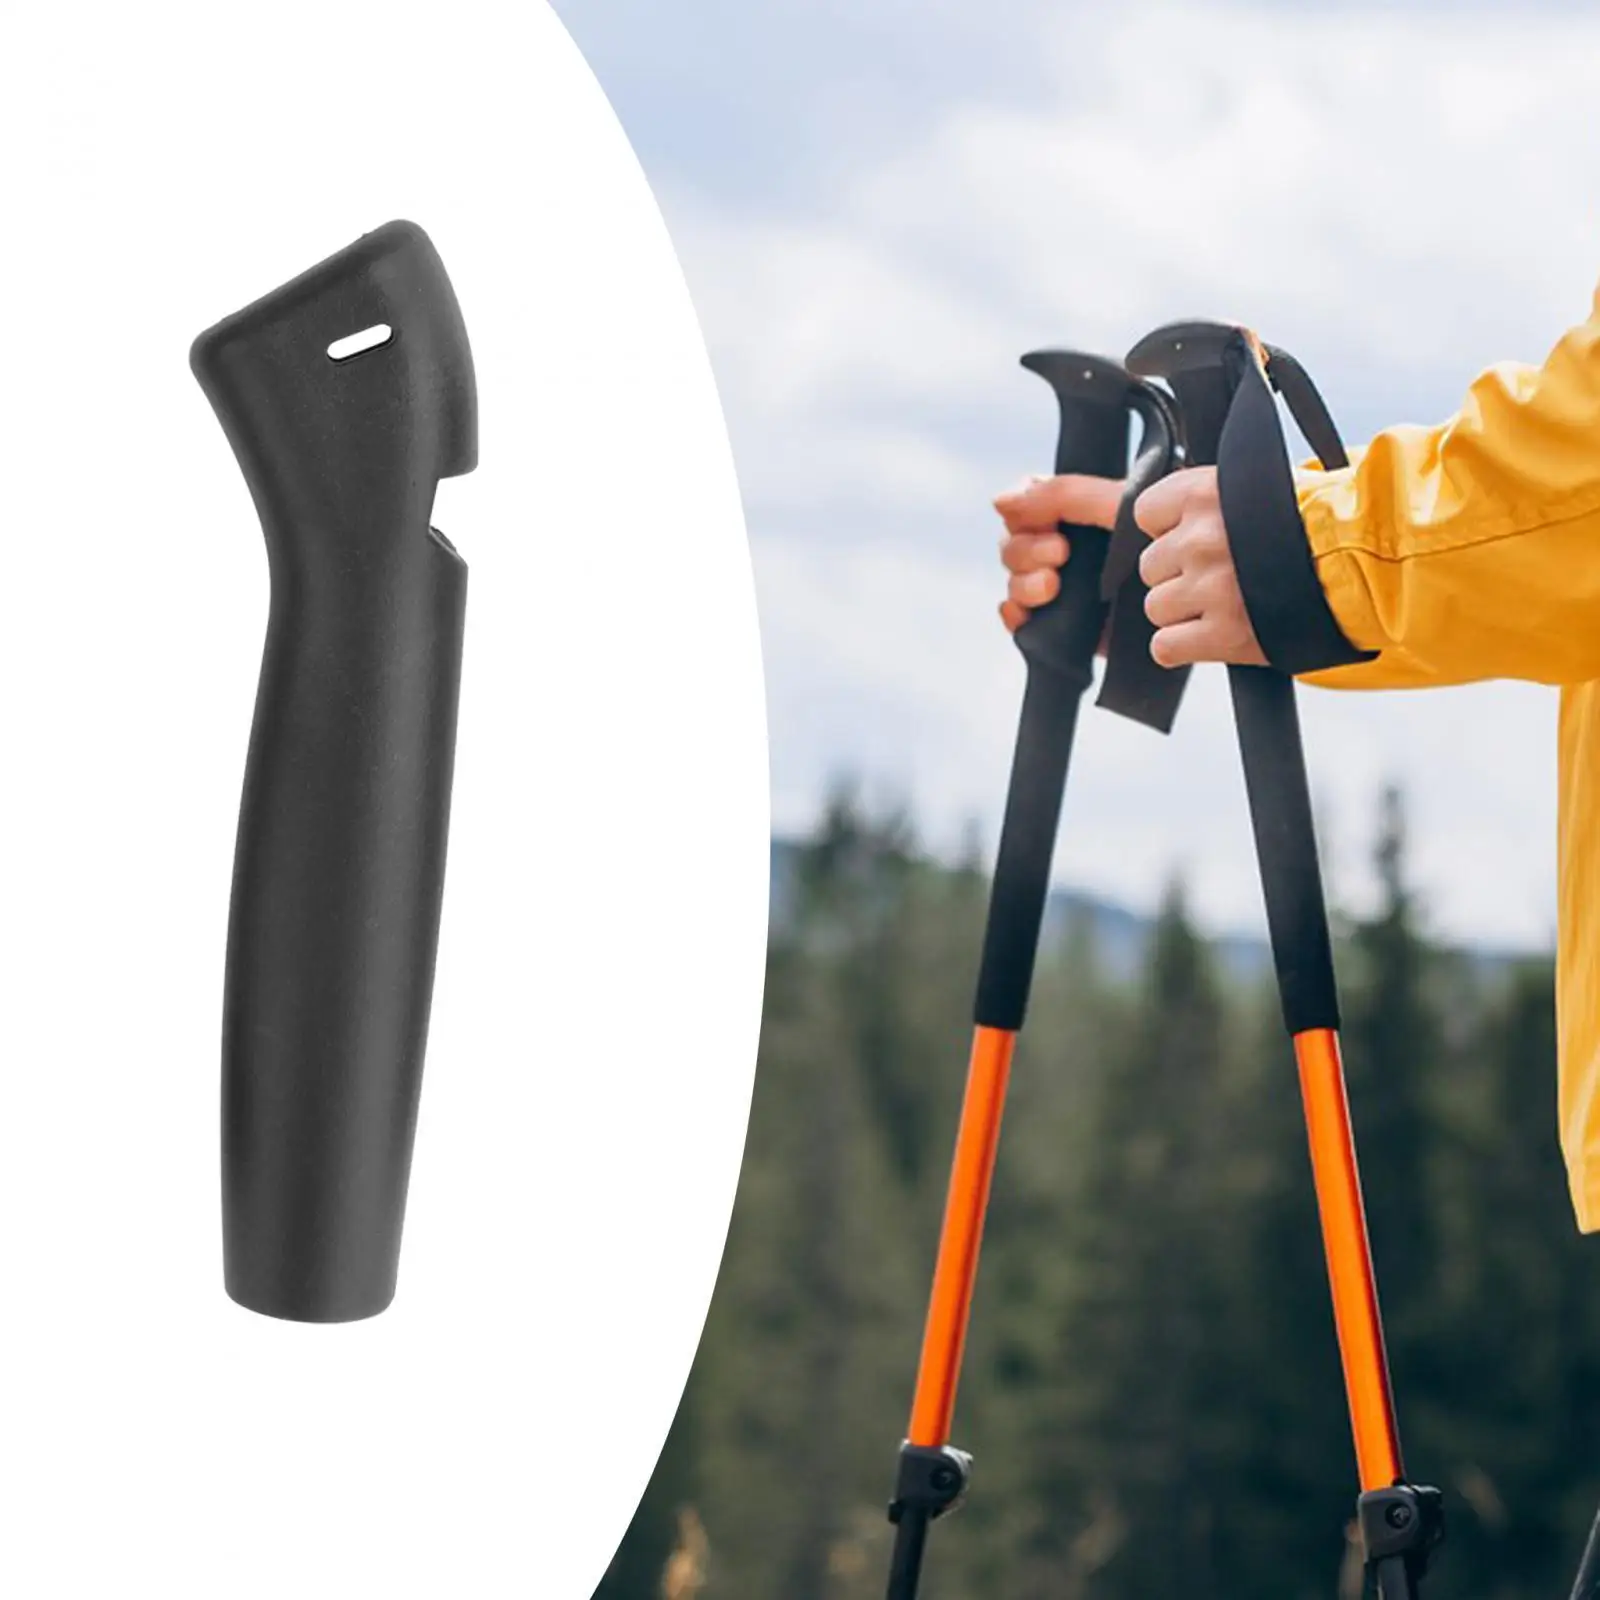 Hiking Pole Handle/ Outdoor Hiking Pole Grip/ Hand Grip Straight Grip Handle for Backpacking/ Hiking/ Mountaineering